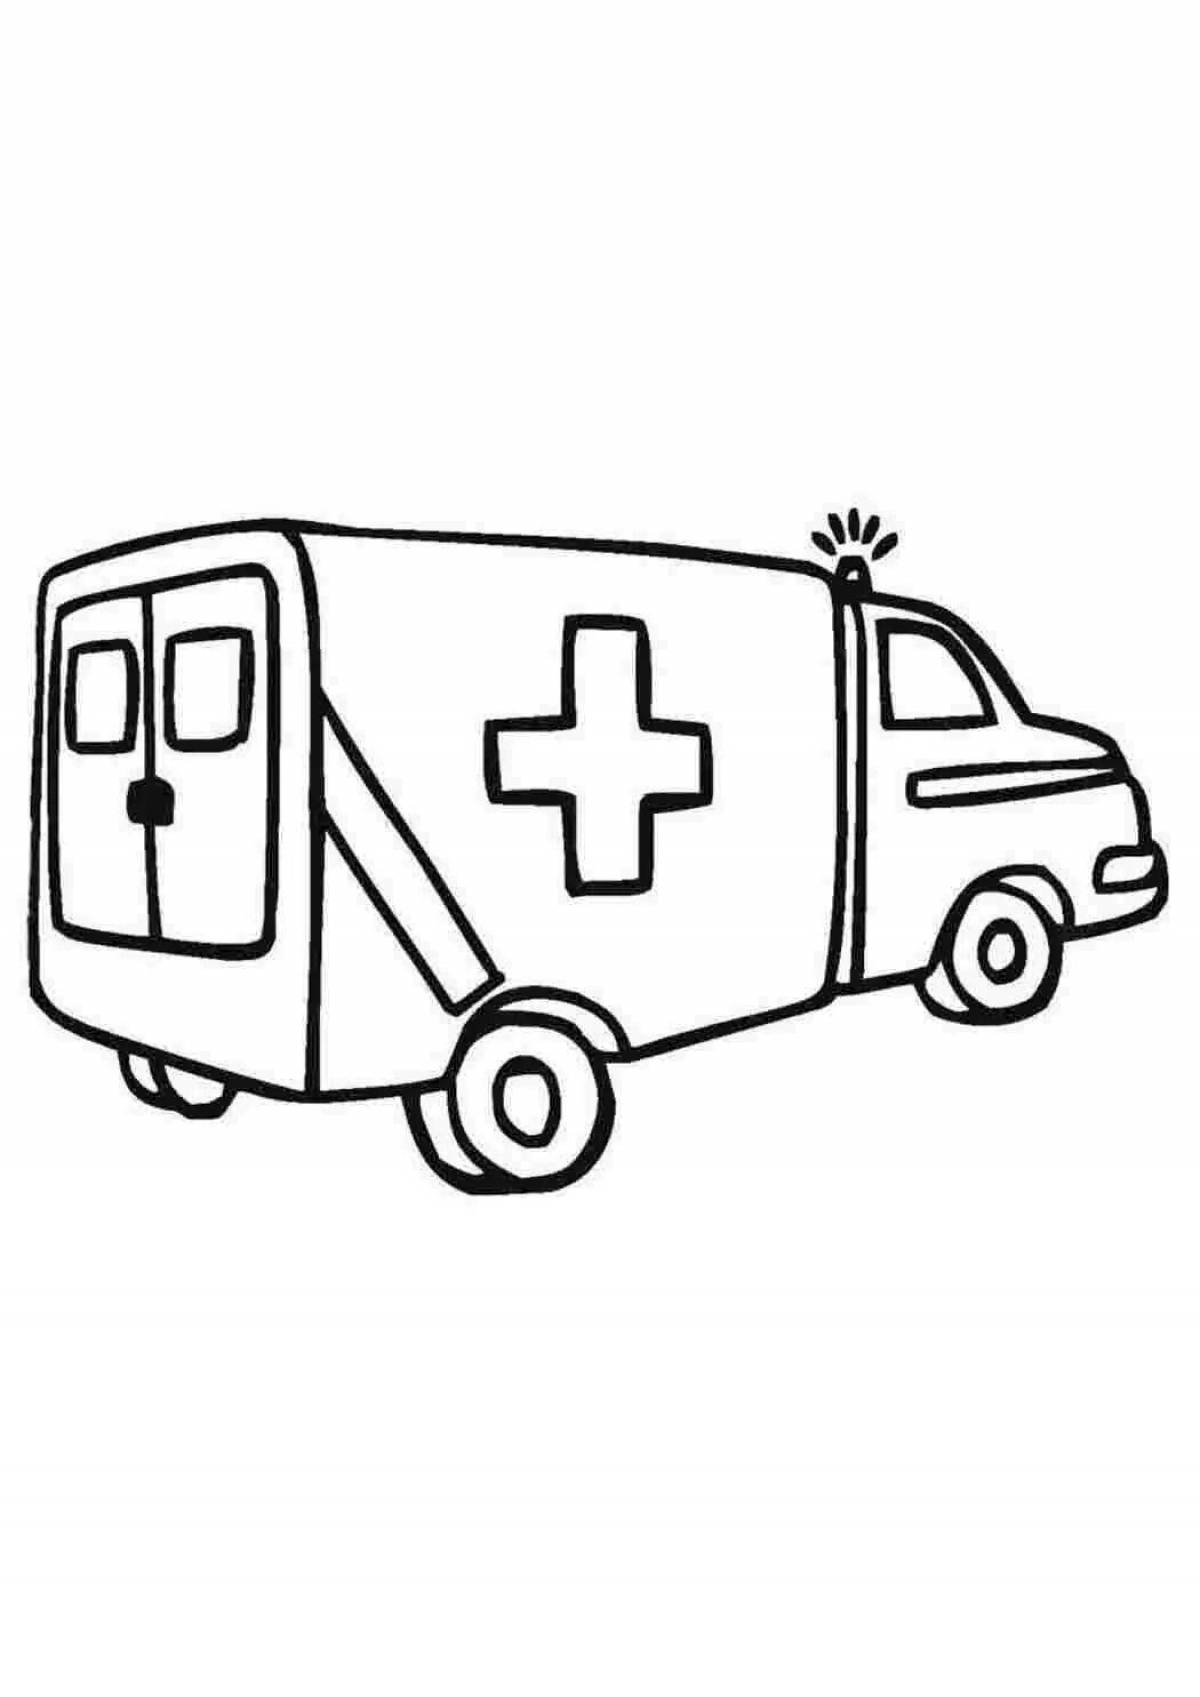 Outstanding ambulance coloring page for boys